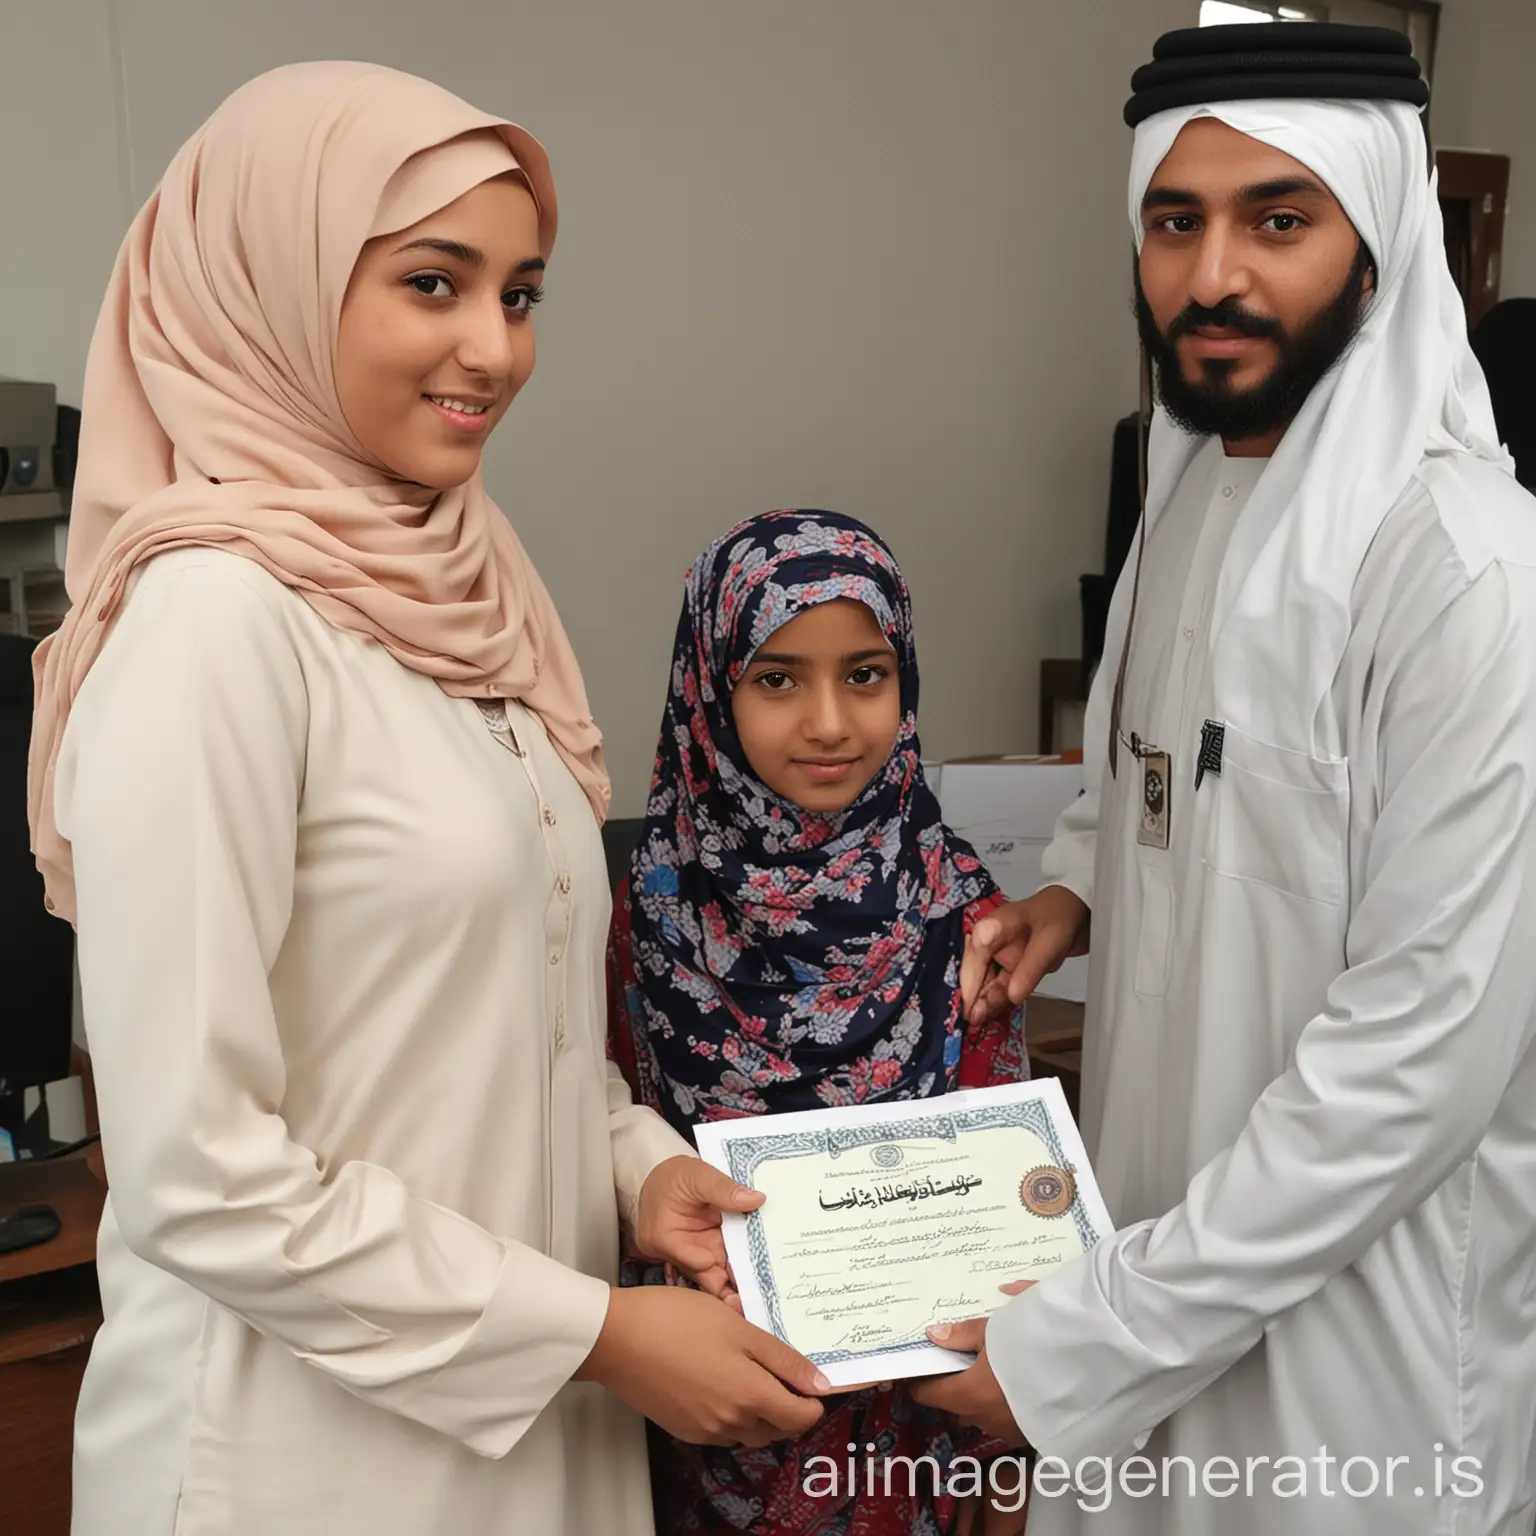 a young muslim girl getting her certificate from teacher